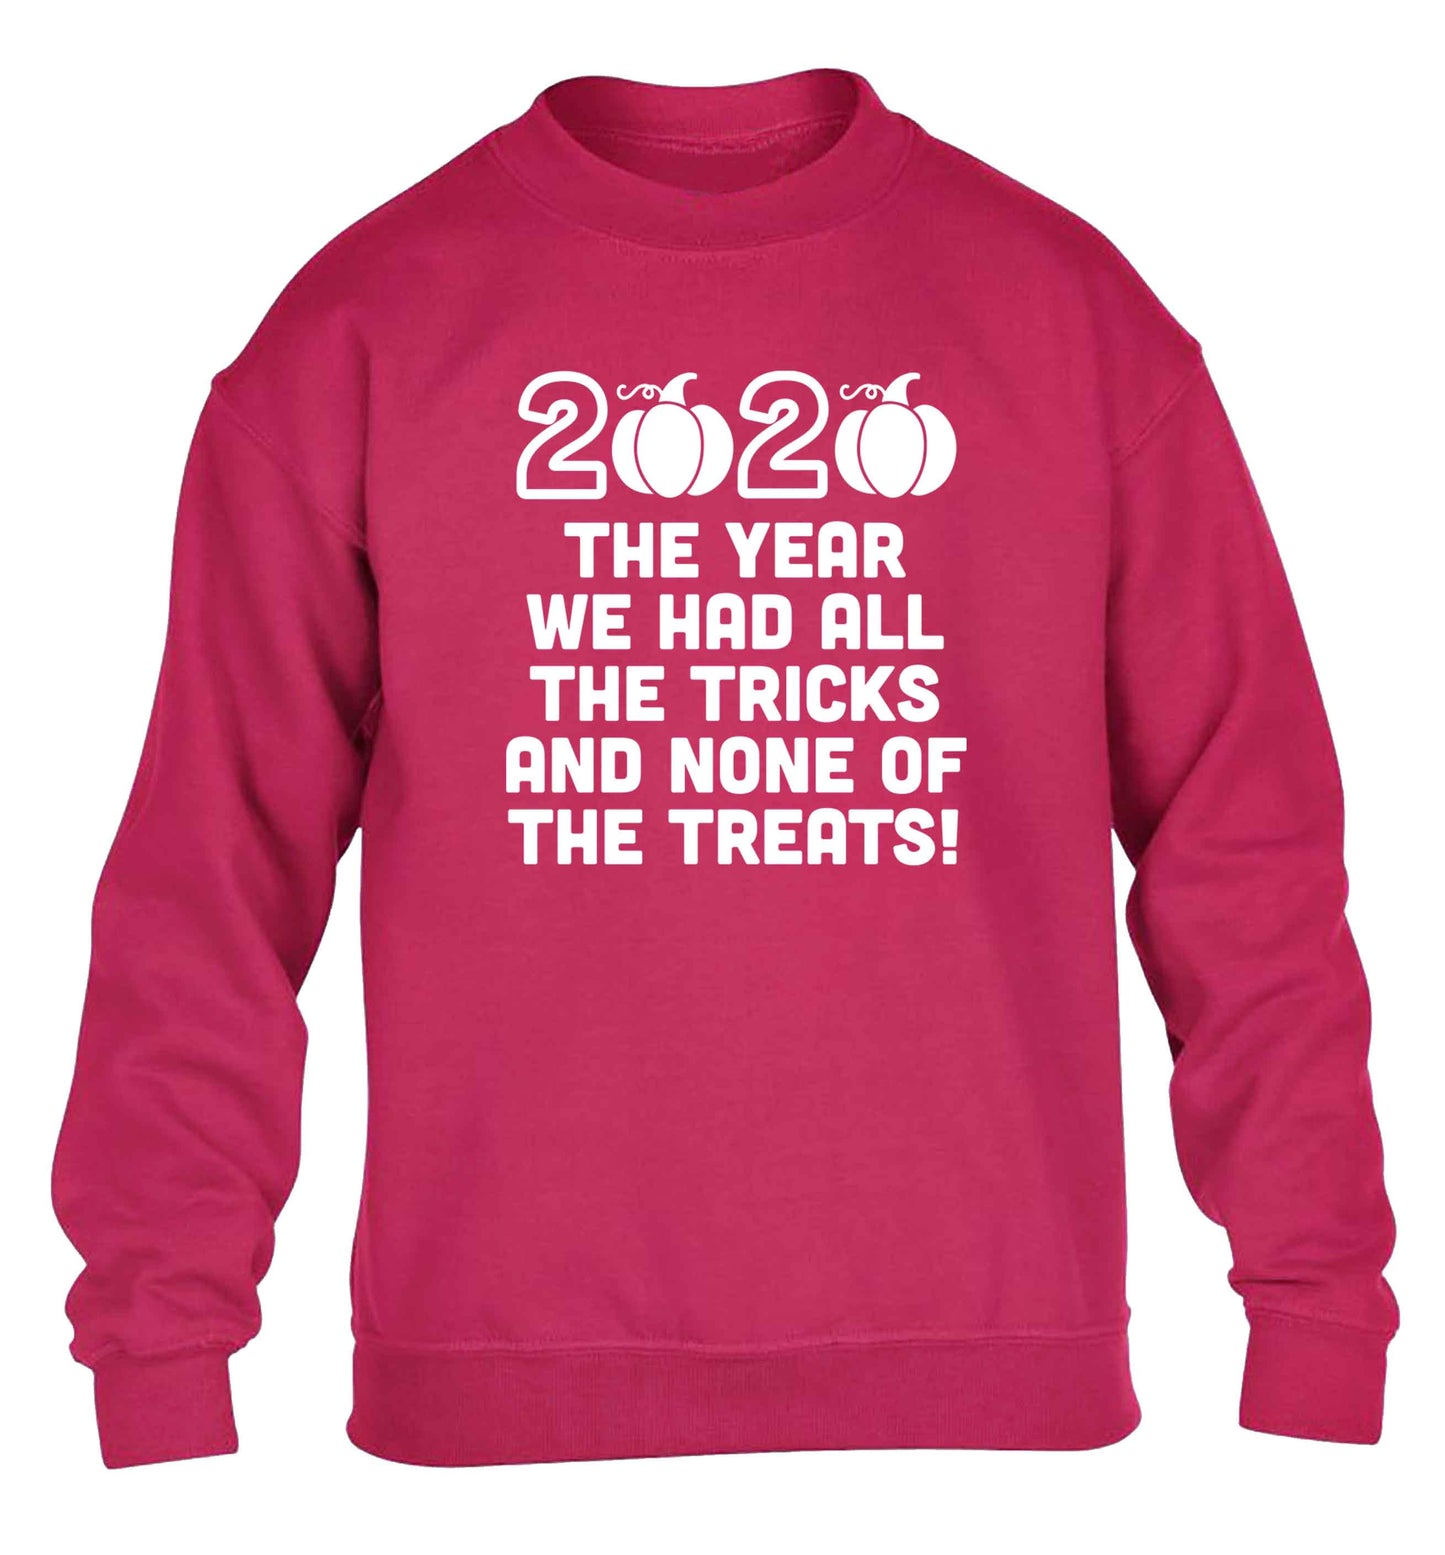 2020 The year we had all of the tricks and none of the treats children's pink sweater 12-13 Years